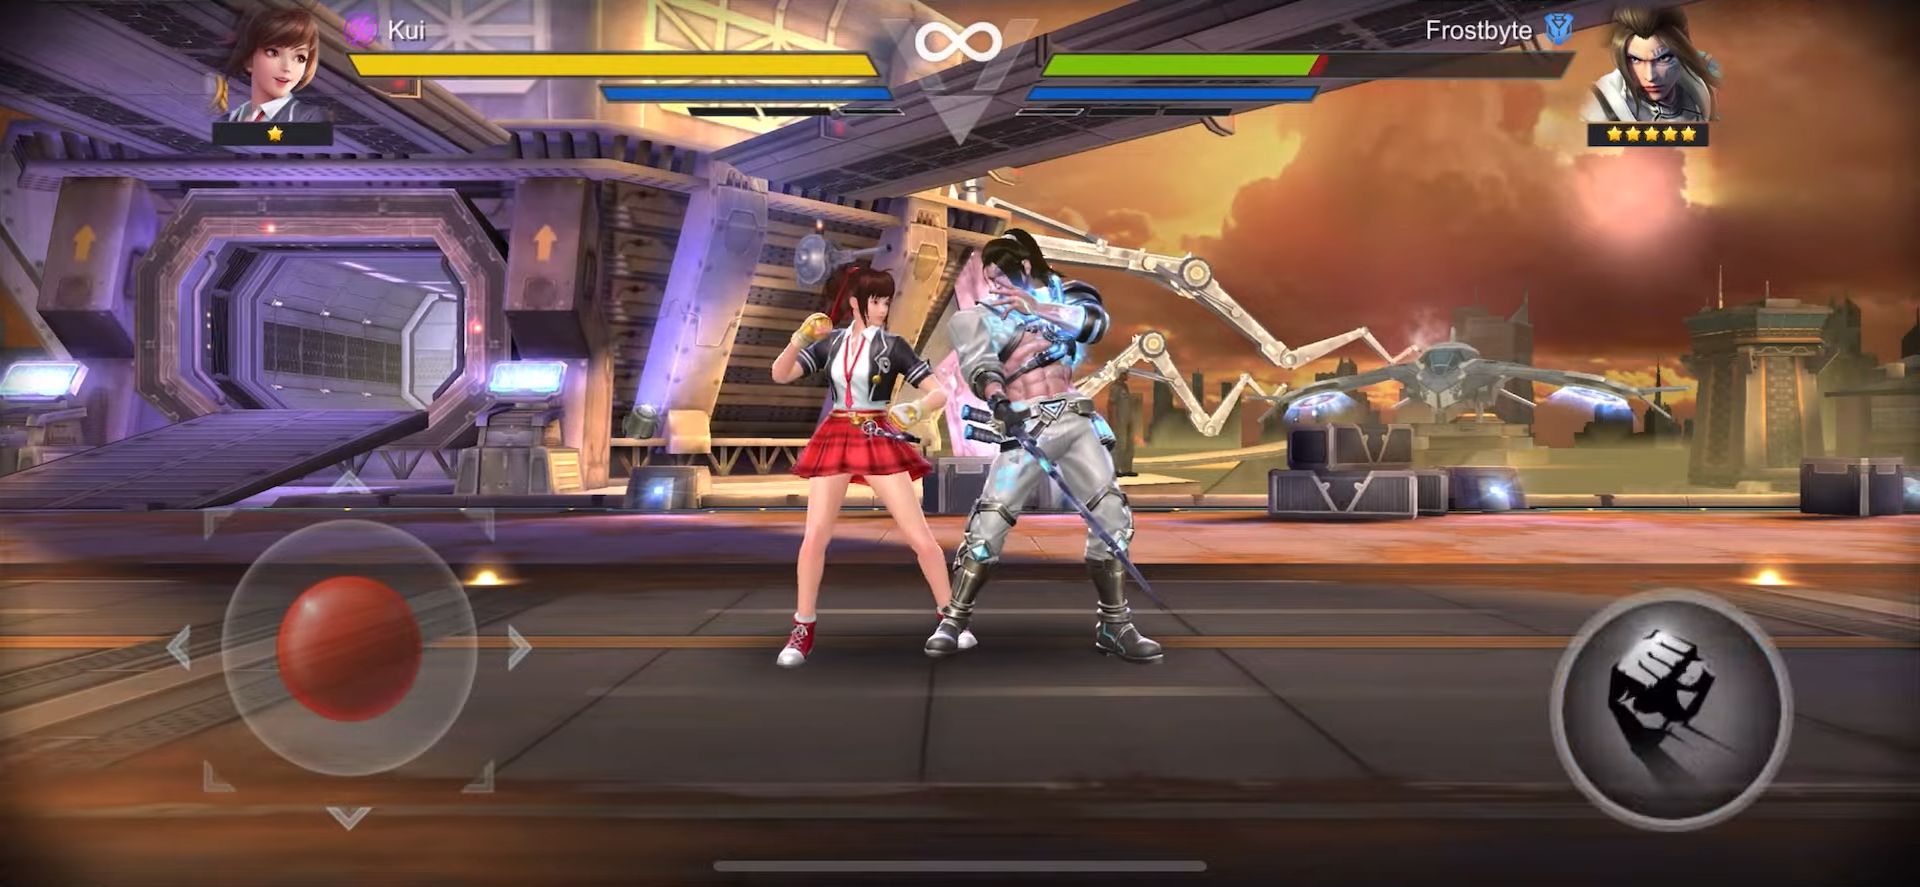 Télécharger Final Fighter: Fighting Game pour Android gratuit.